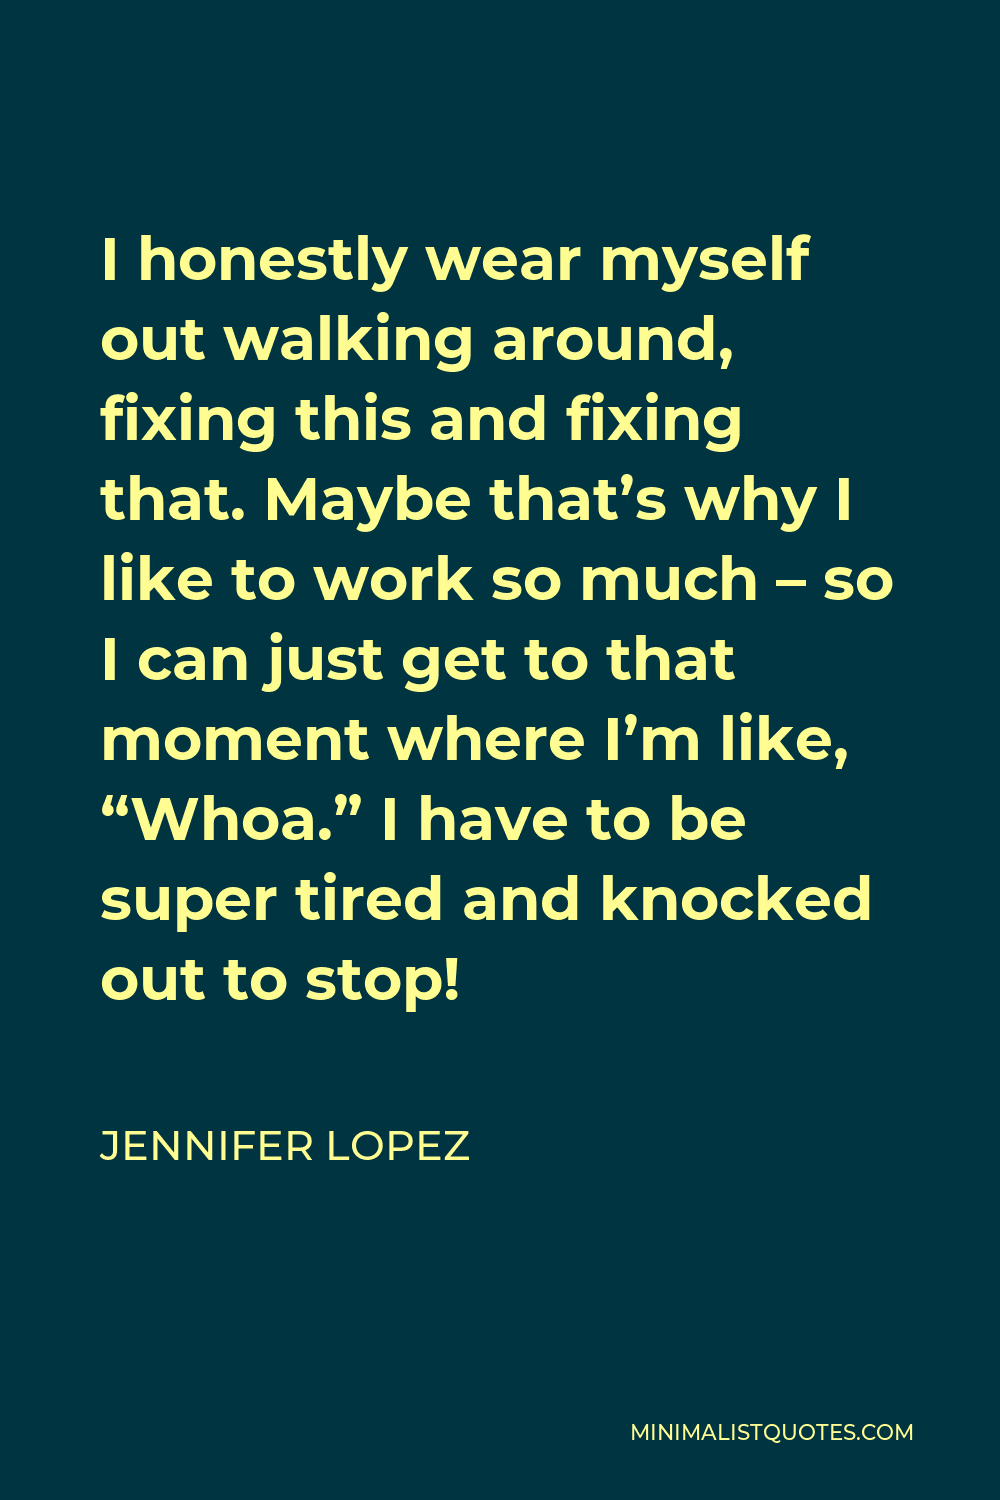 Jennifer Lopez Quote - I honestly wear myself out walking around, fixing this and fixing that. Maybe that’s why I like to work so much – so I can just get to that moment where I’m like, “Whoa.” I have to be super tired and knocked out to stop!